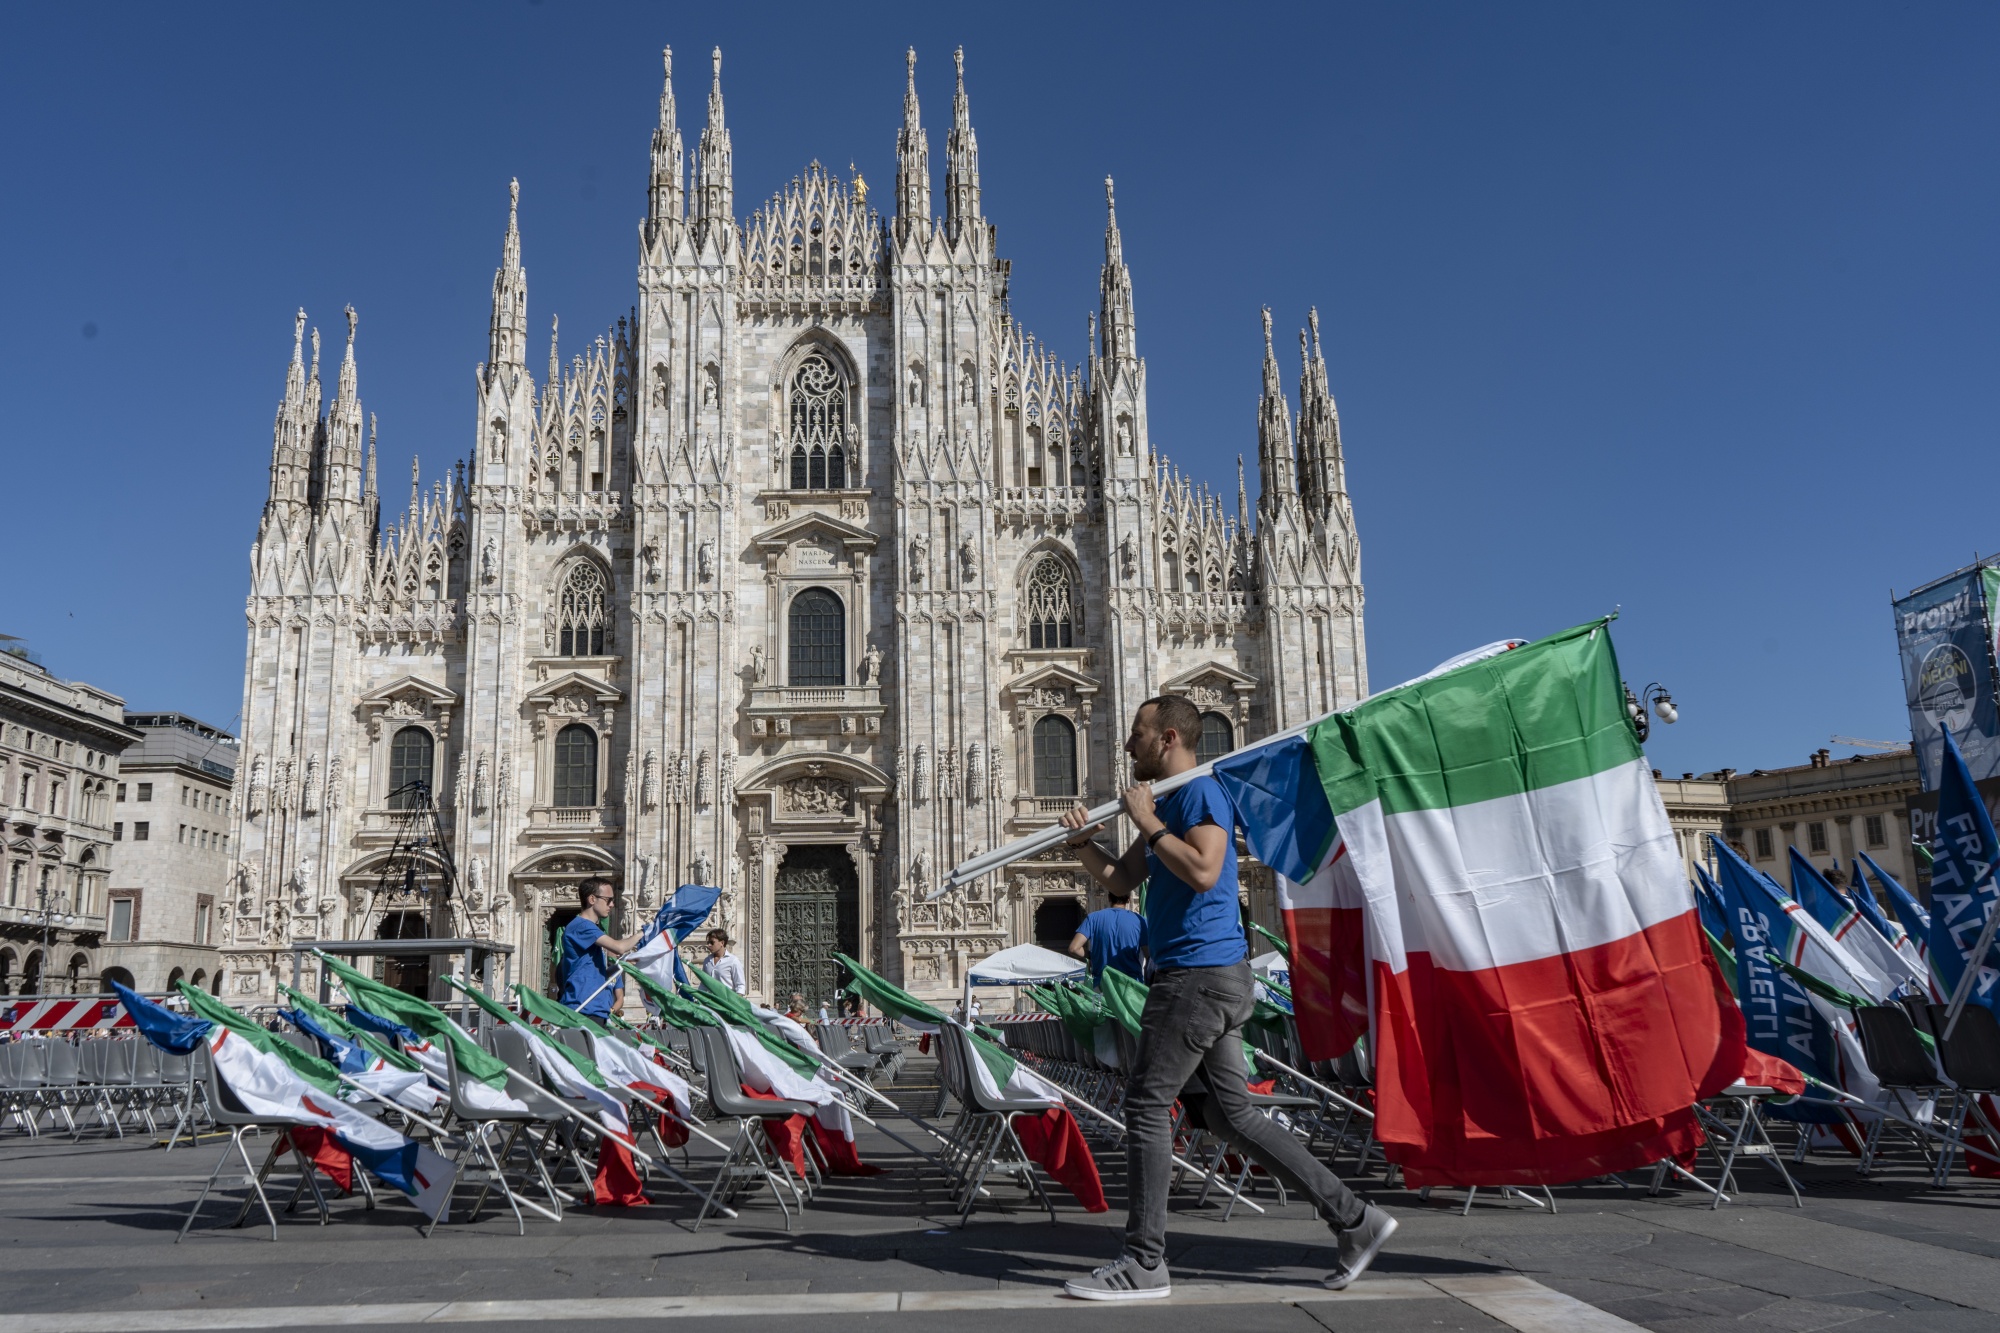 Attendees at a Brothers of Italy election campaign event in Duomo square in Milan, Italy, on Sept. 11.&nbsp;A right-wing coalition is widely expected to win Italy’s election on Sunday.